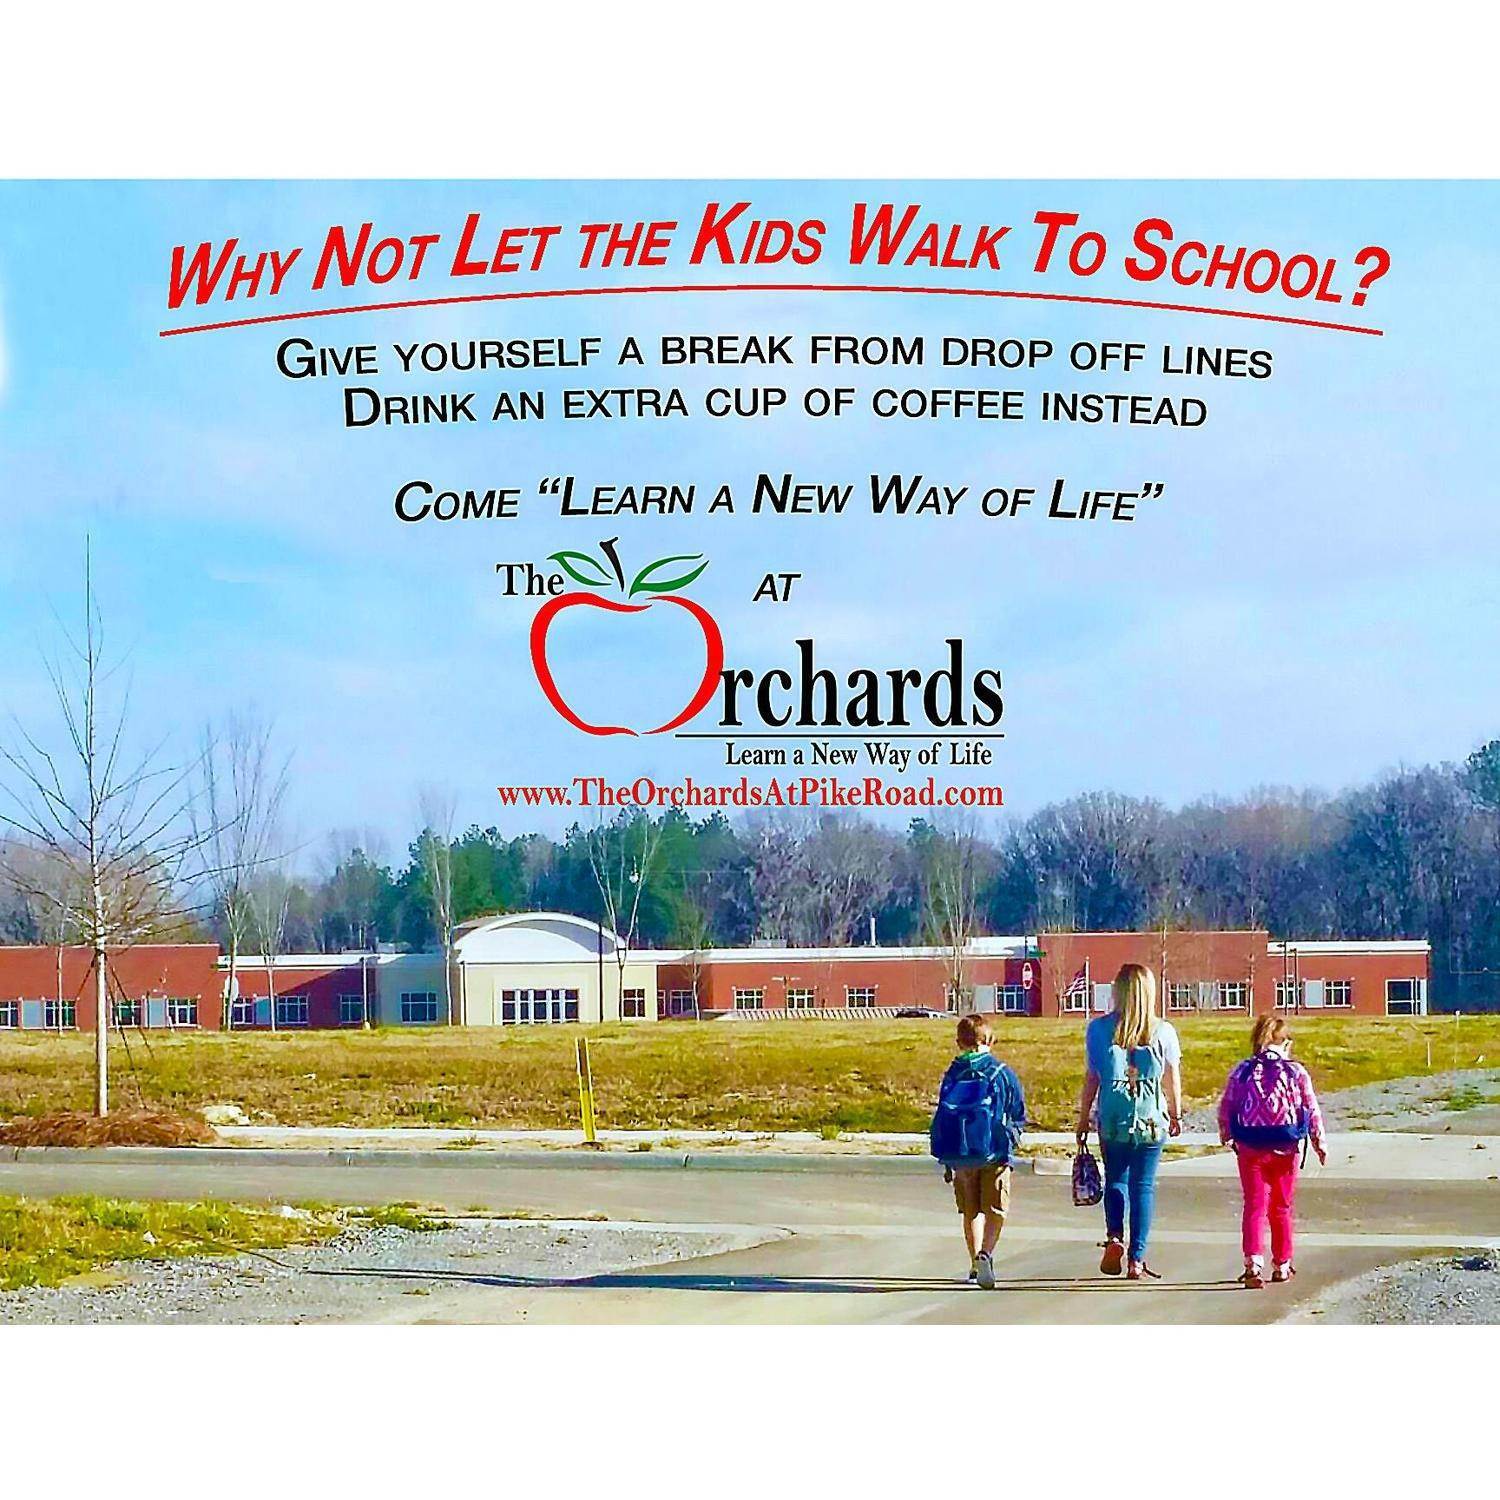 15. The Orchards at Pike Road building at 130 Avenue Of Learning, Pike Road, AL 36064